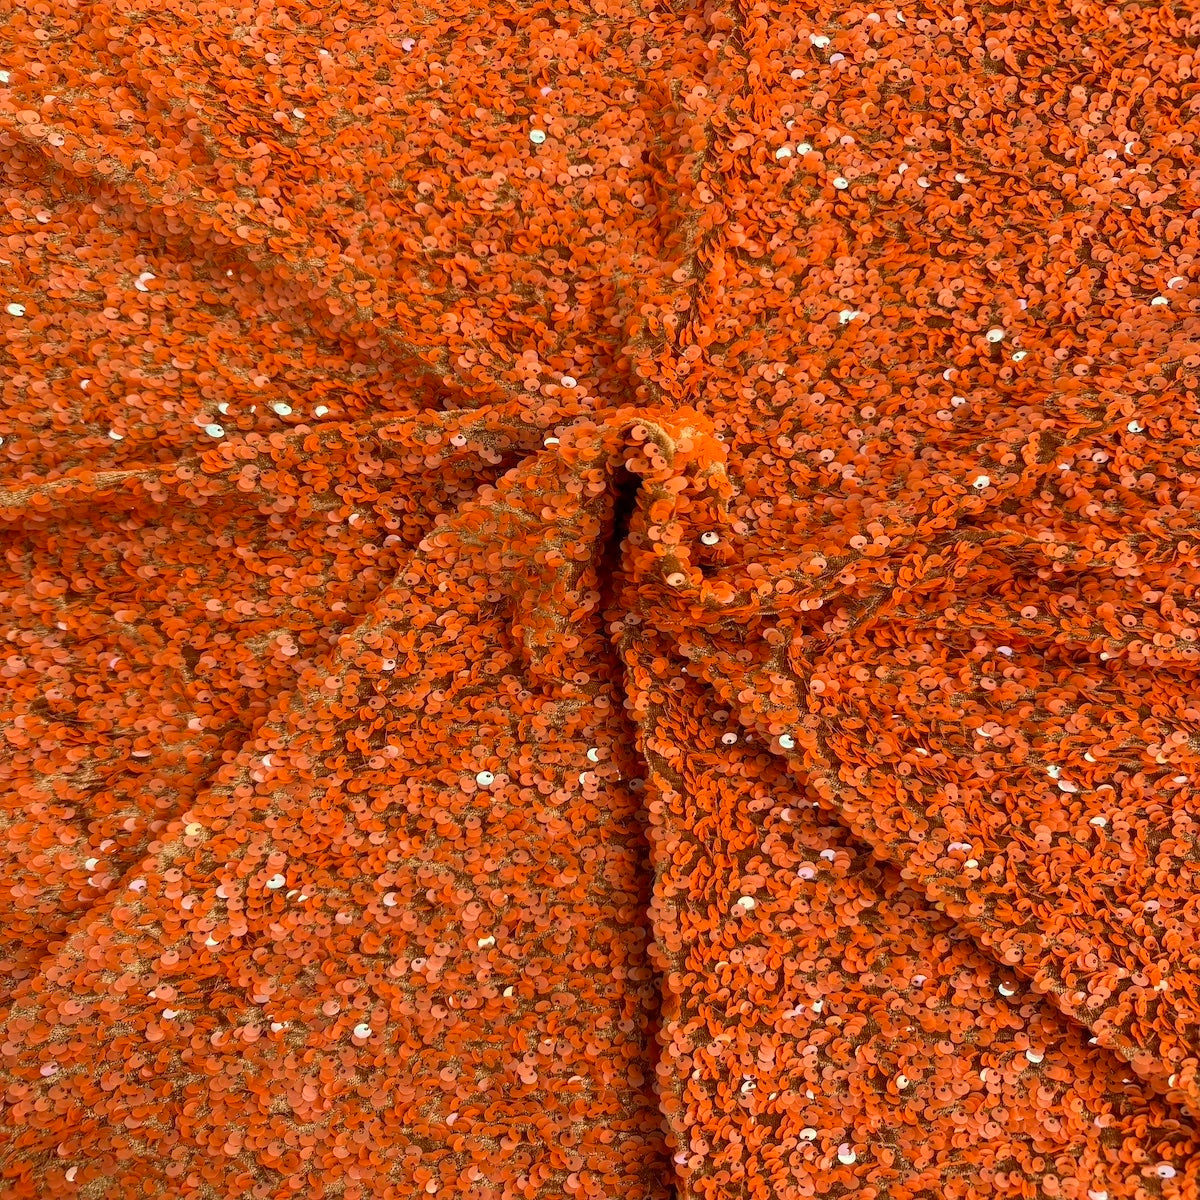 Rust Orange Sequins Embroidered Stretch Velvet Rodeo Fabric